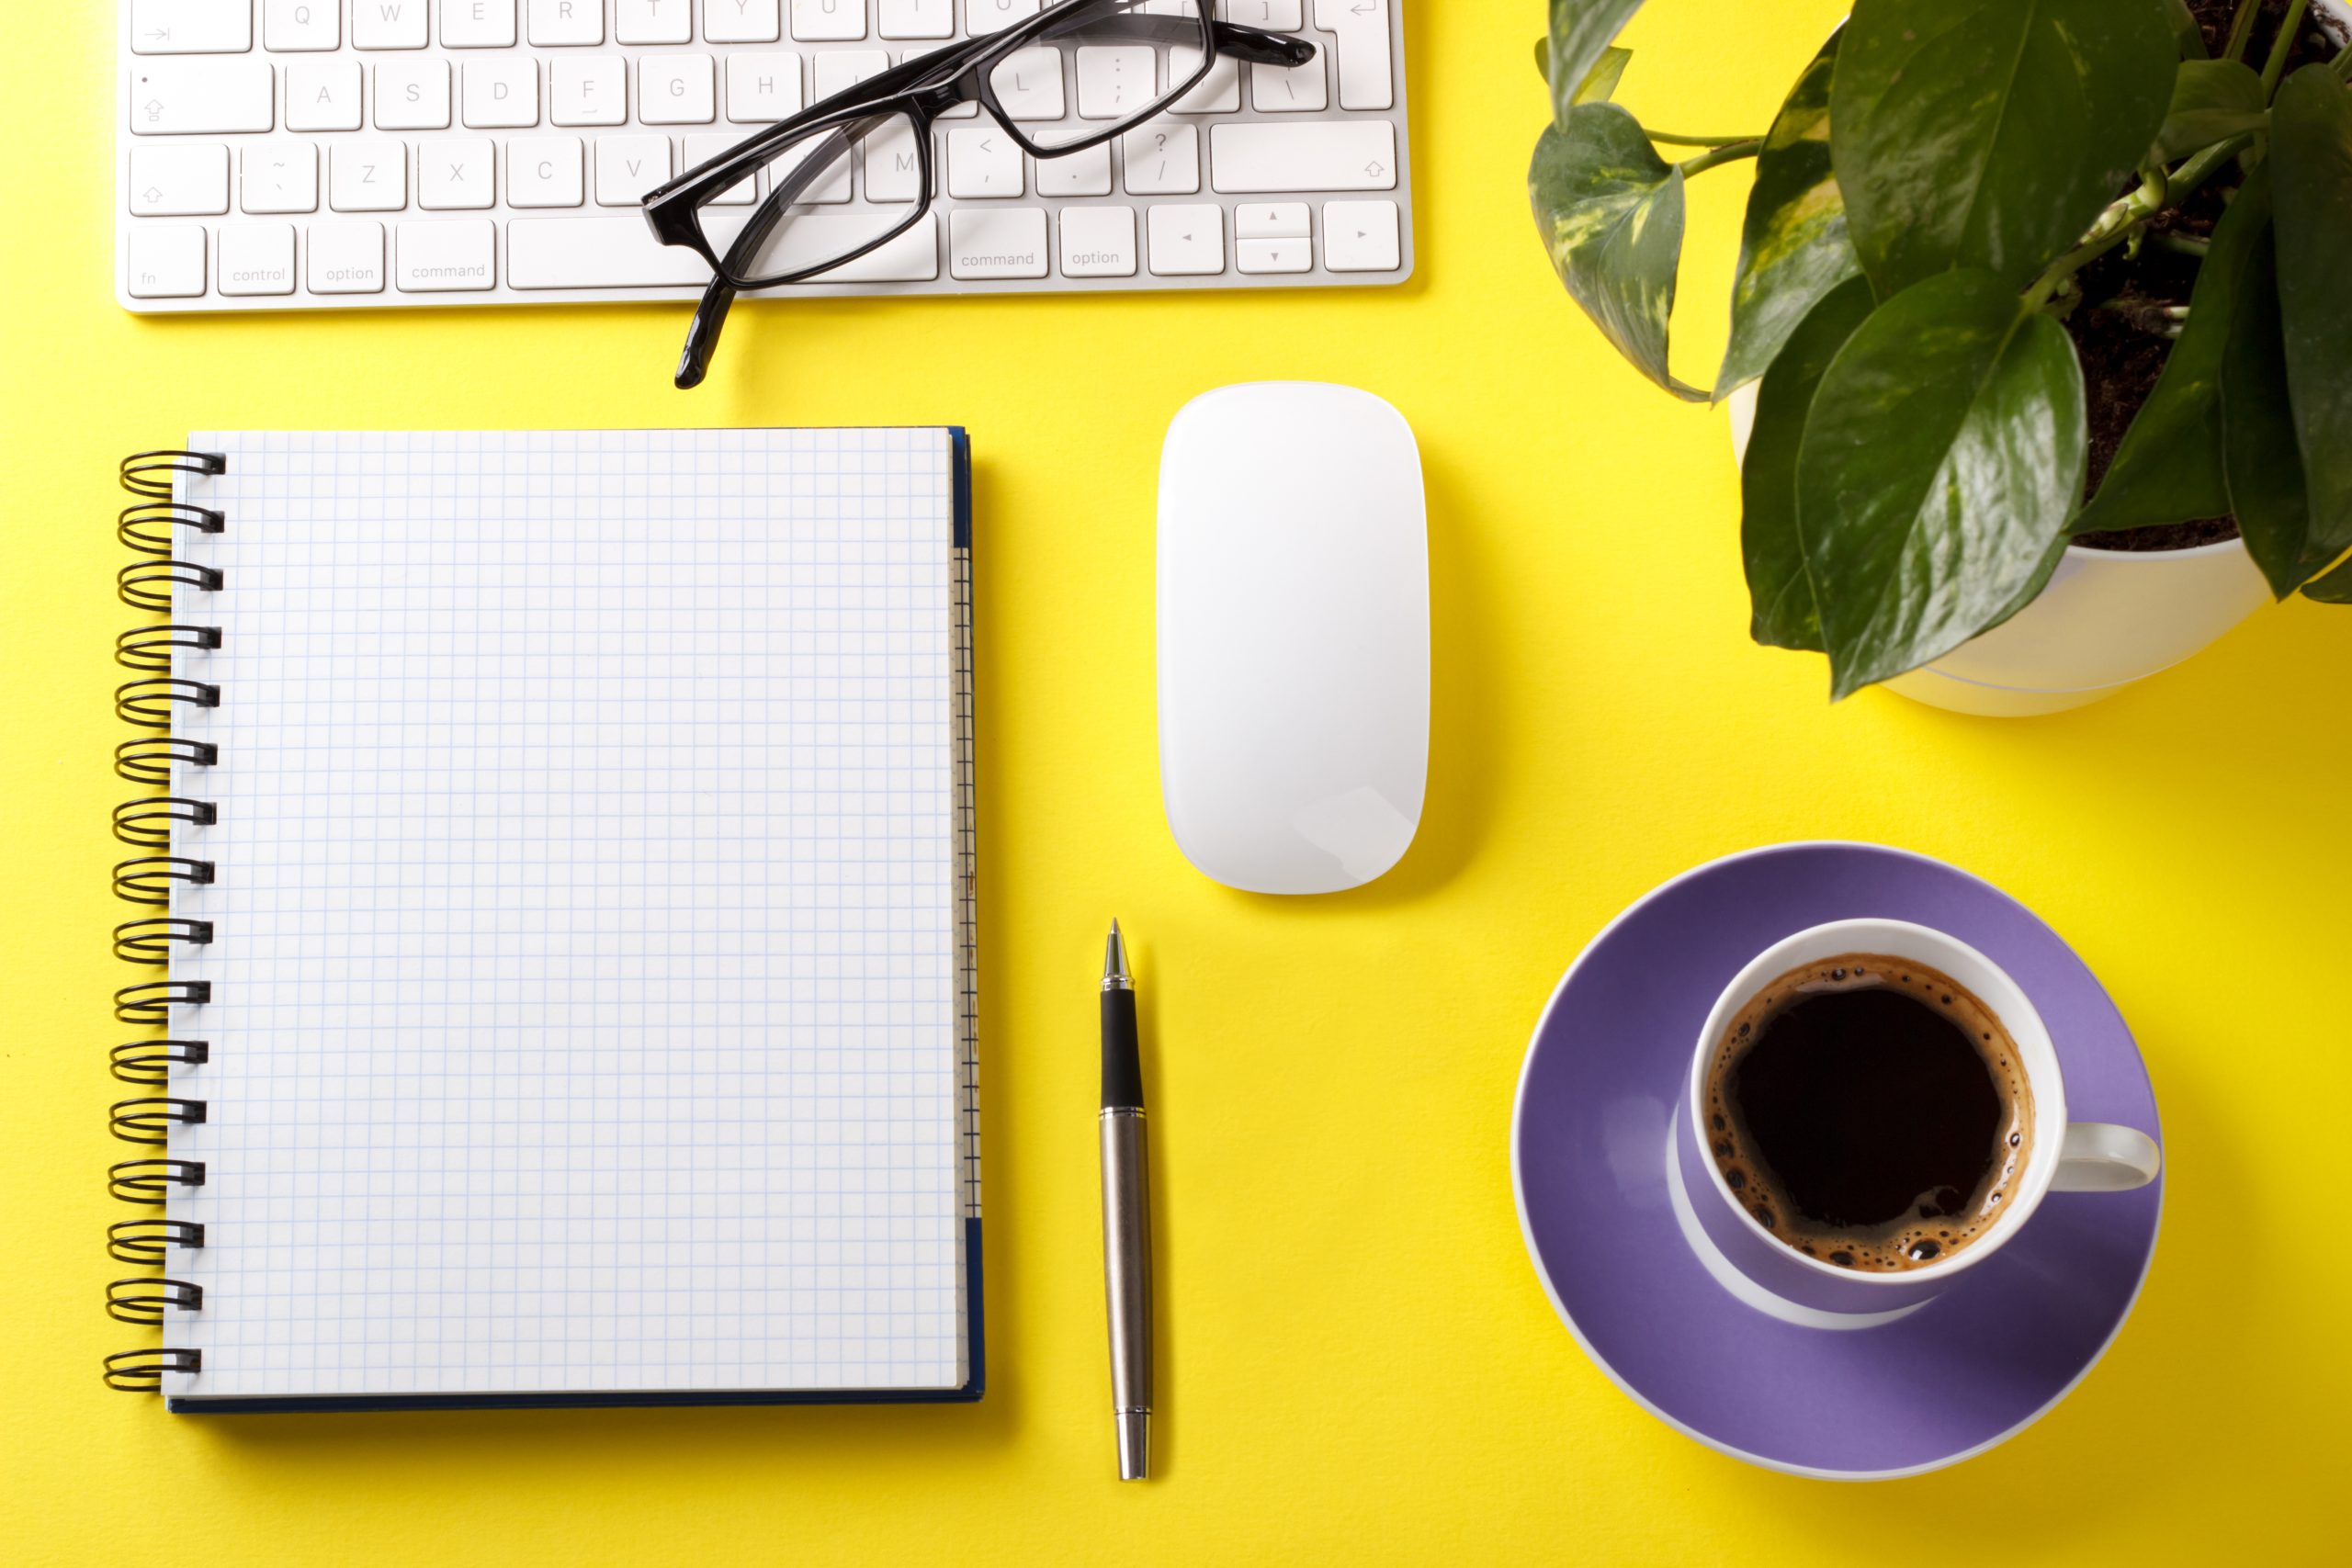 A top view of a modern yellow desktop with a keyboard, notepad, pen, plant, glasses, and a cup of coffee on top.